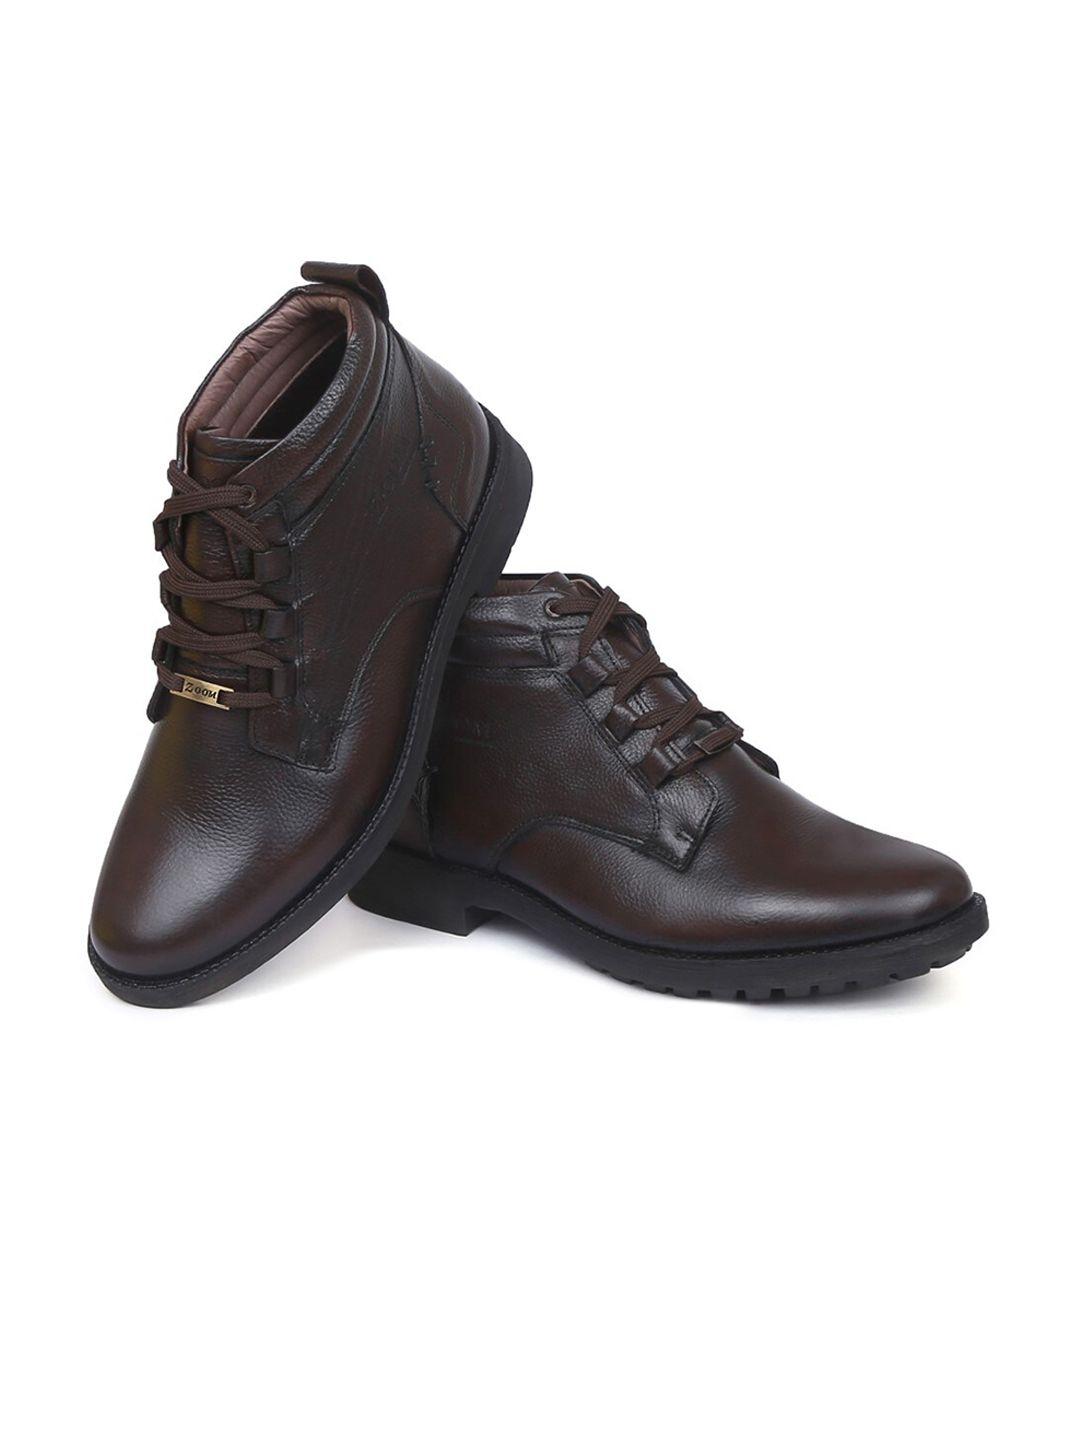 zoom shoes men brown solid leather heeled boots